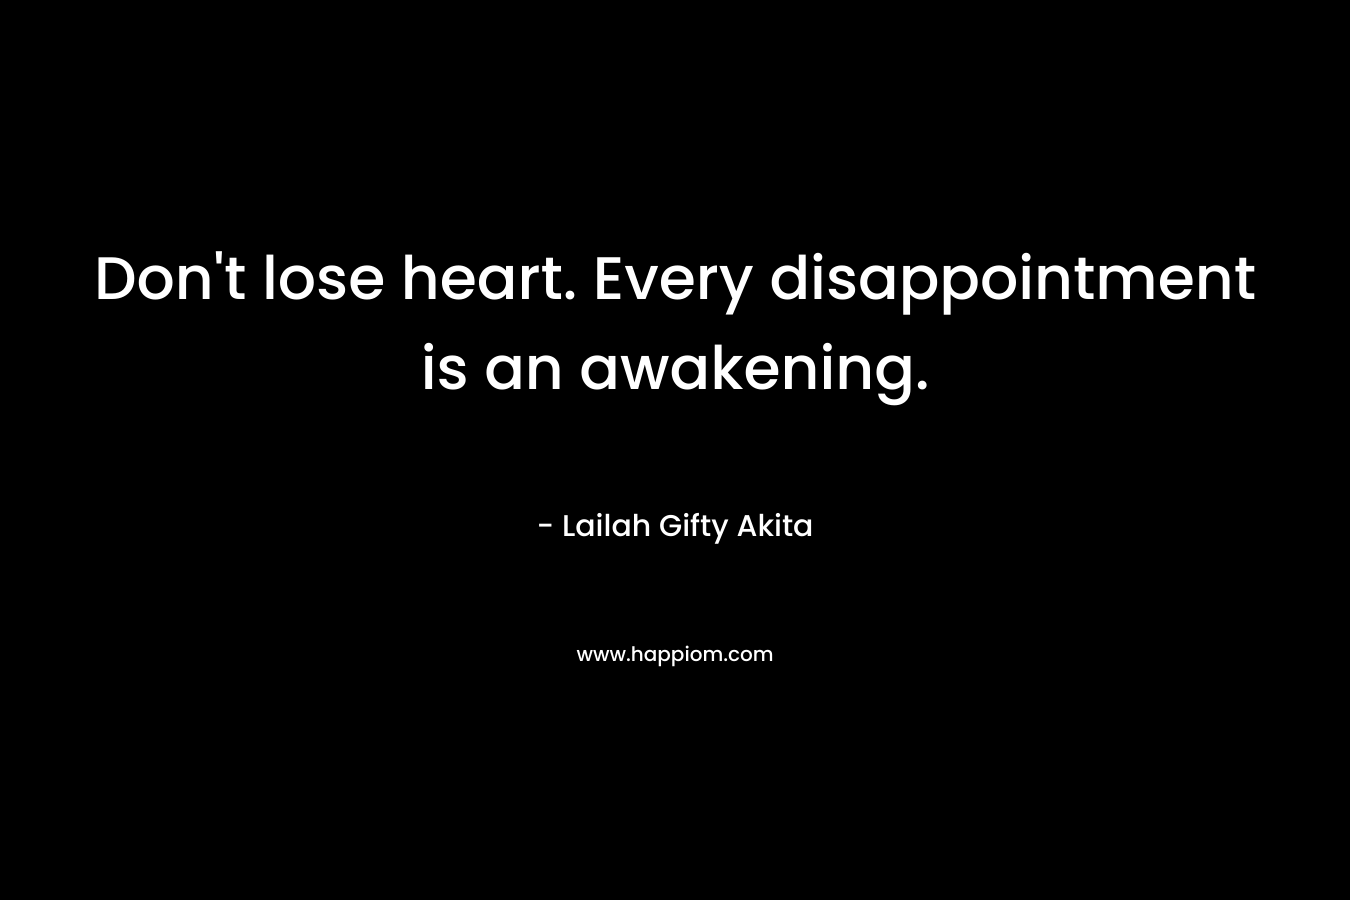 Don't lose heart. Every disappointment is an awakening.